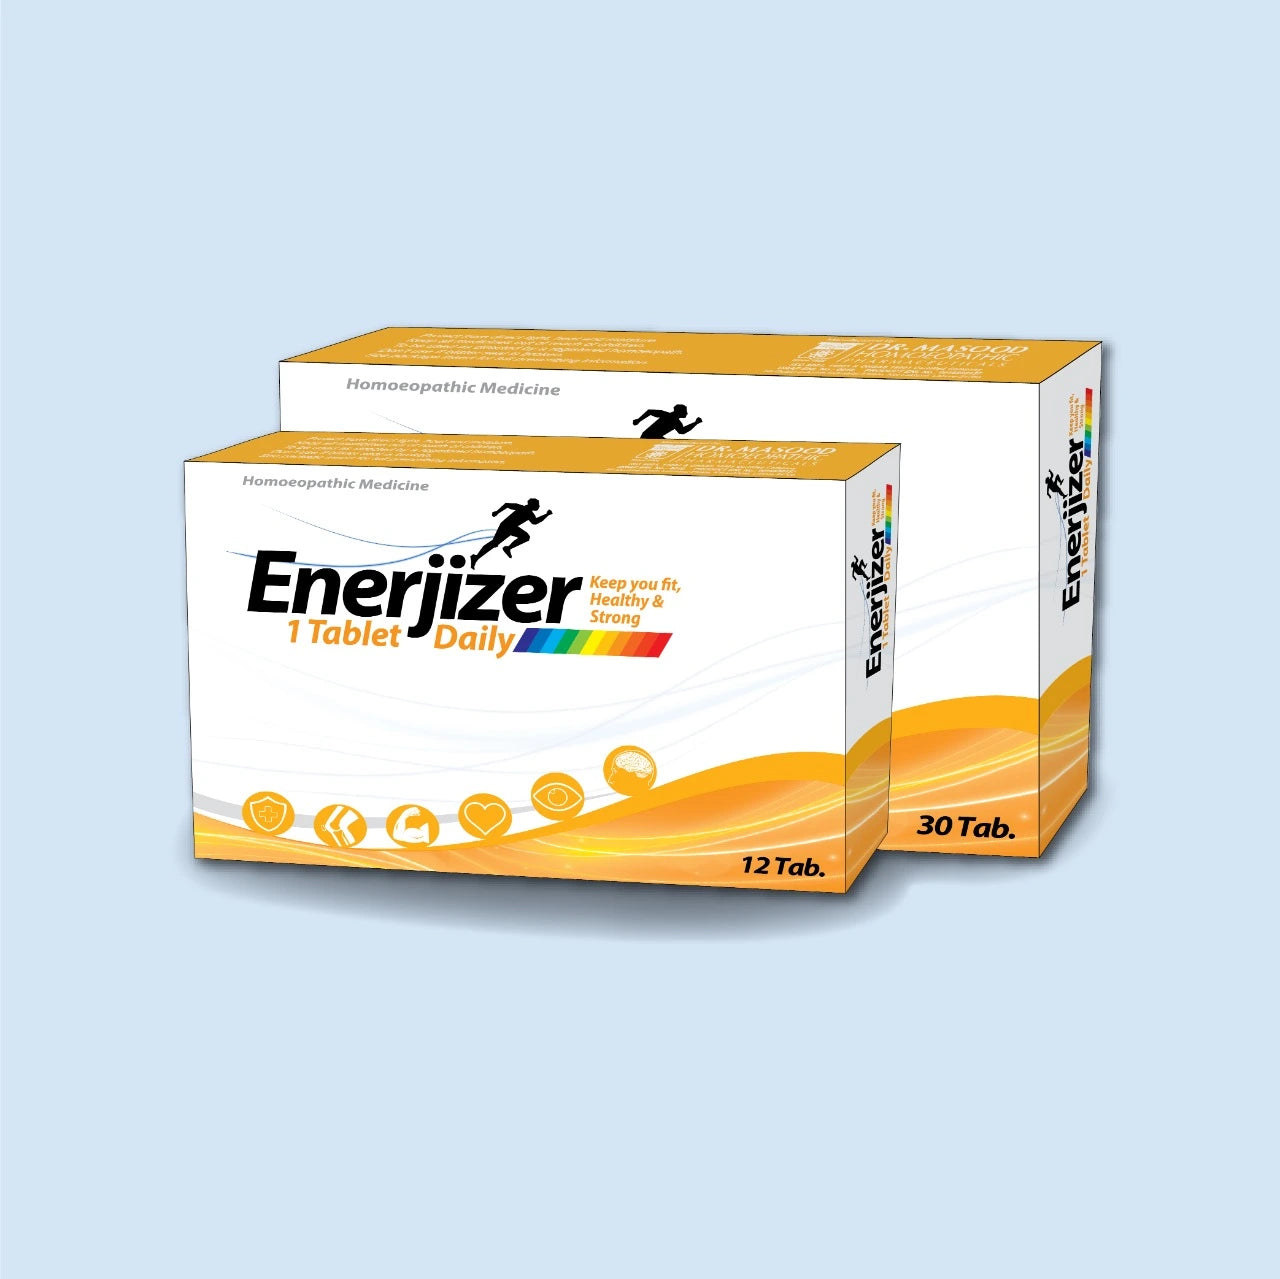 ENERJIZER (1 Tab. Daily) - Homeopathic Tablets For Energy - Dr. Masood homeopathic